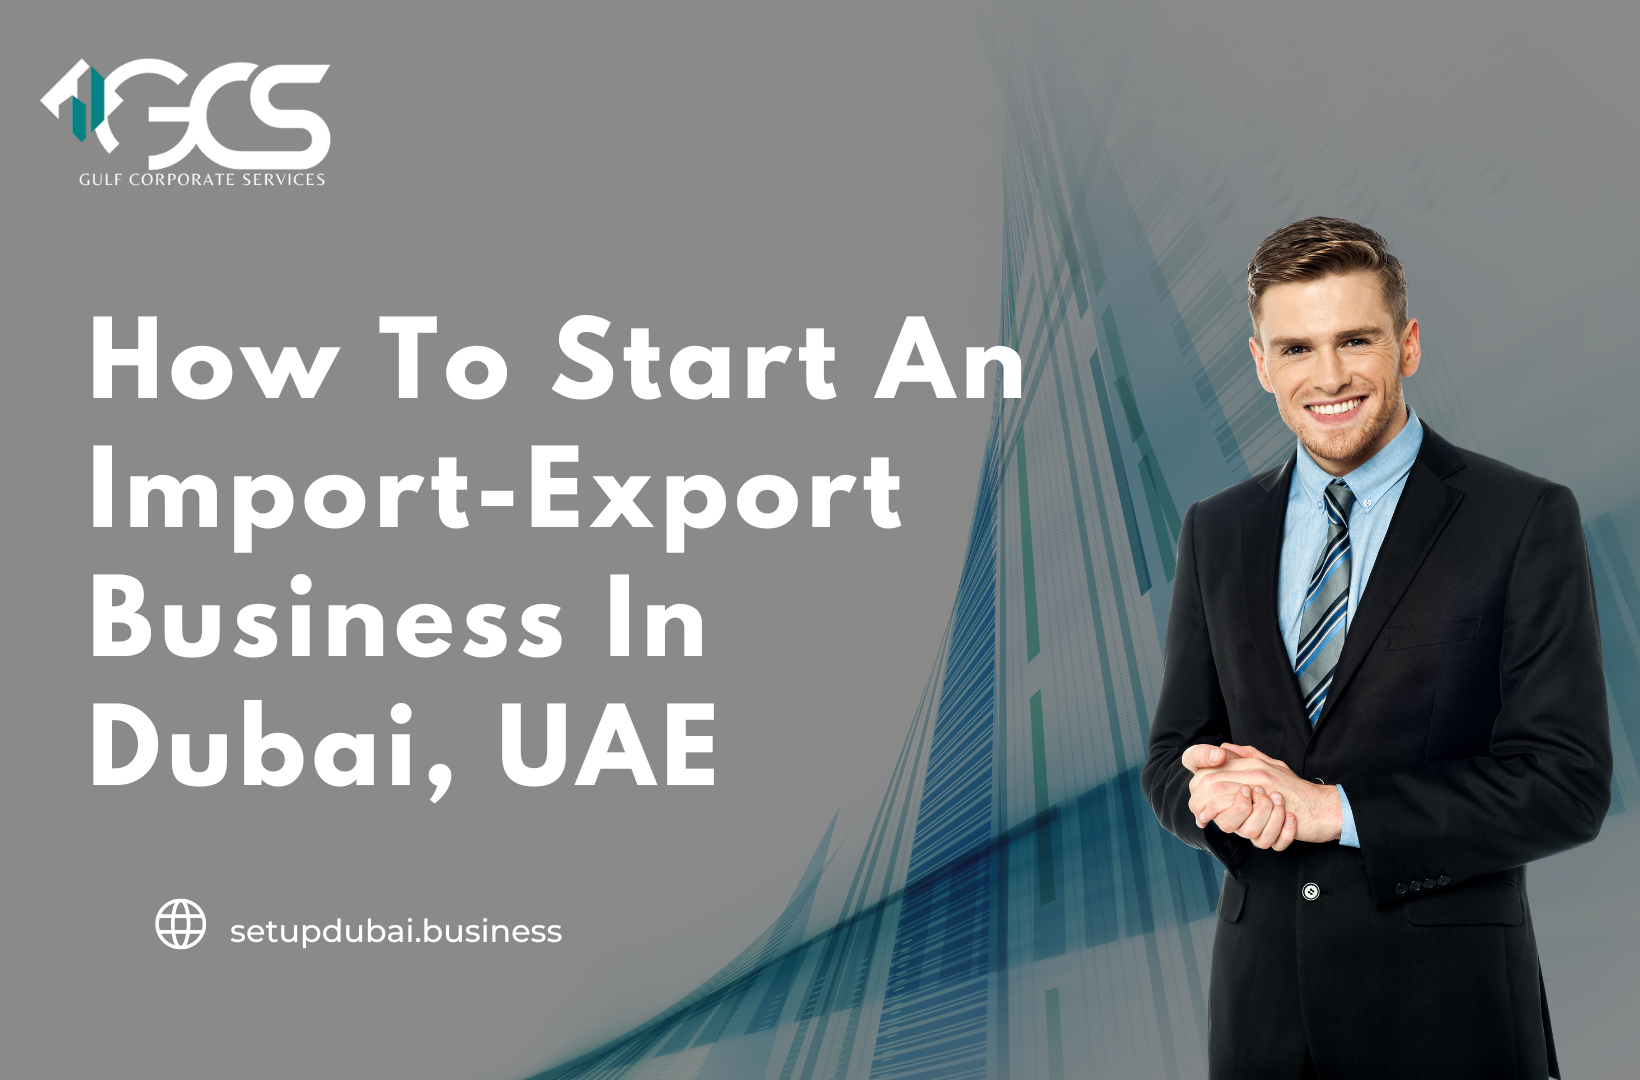 How To Start An Import-Export Business In Dubai, UAE